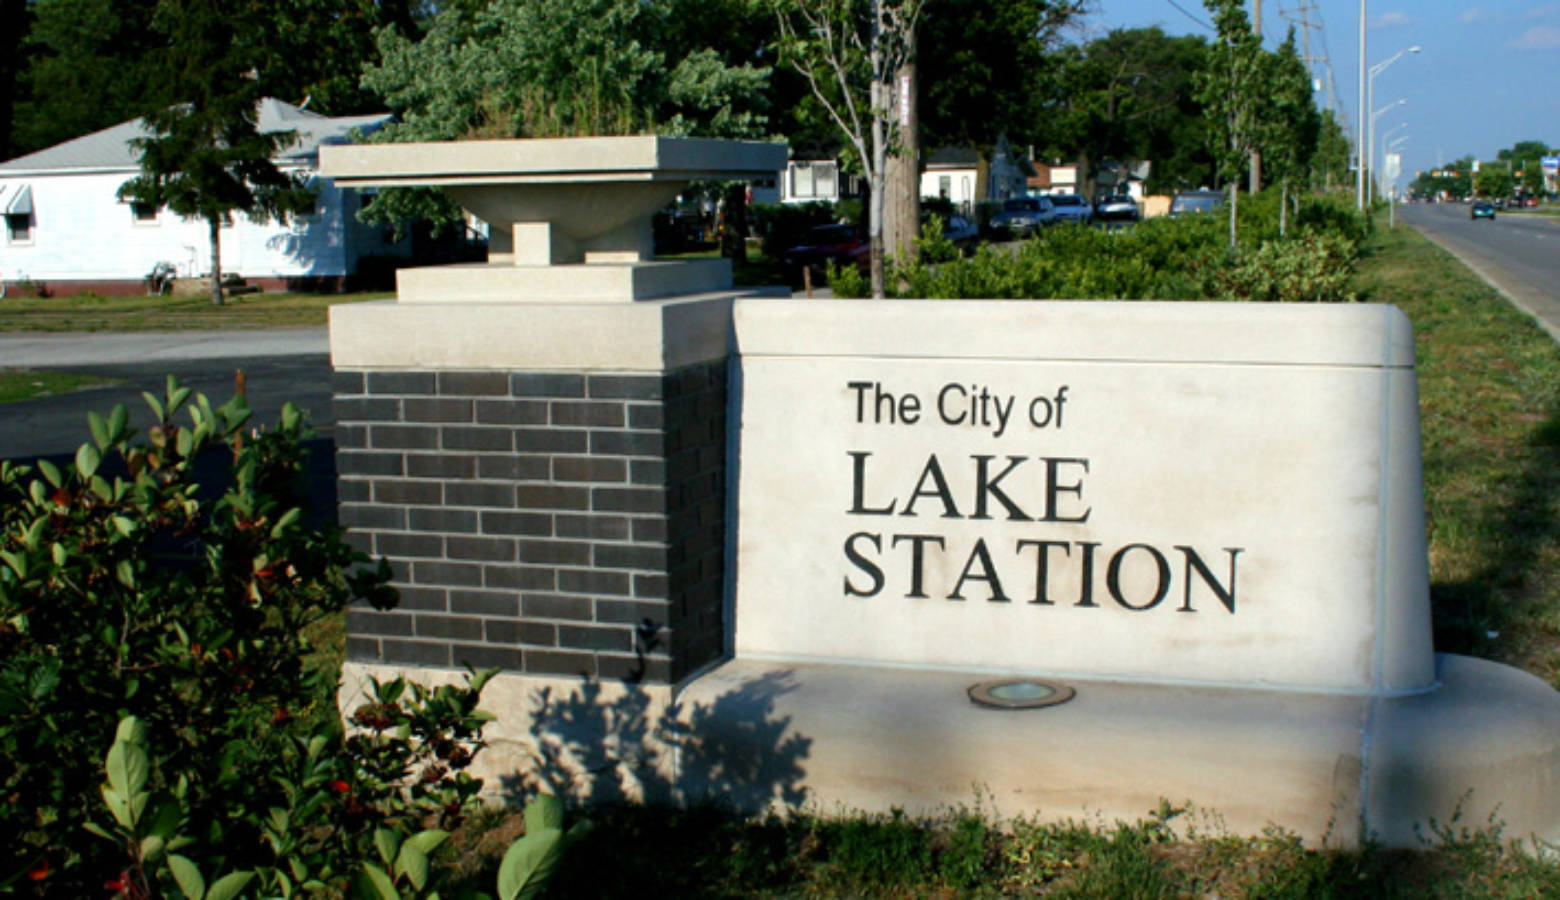 The city sign for Lake Station, 2008. (Wikimedia Commons)